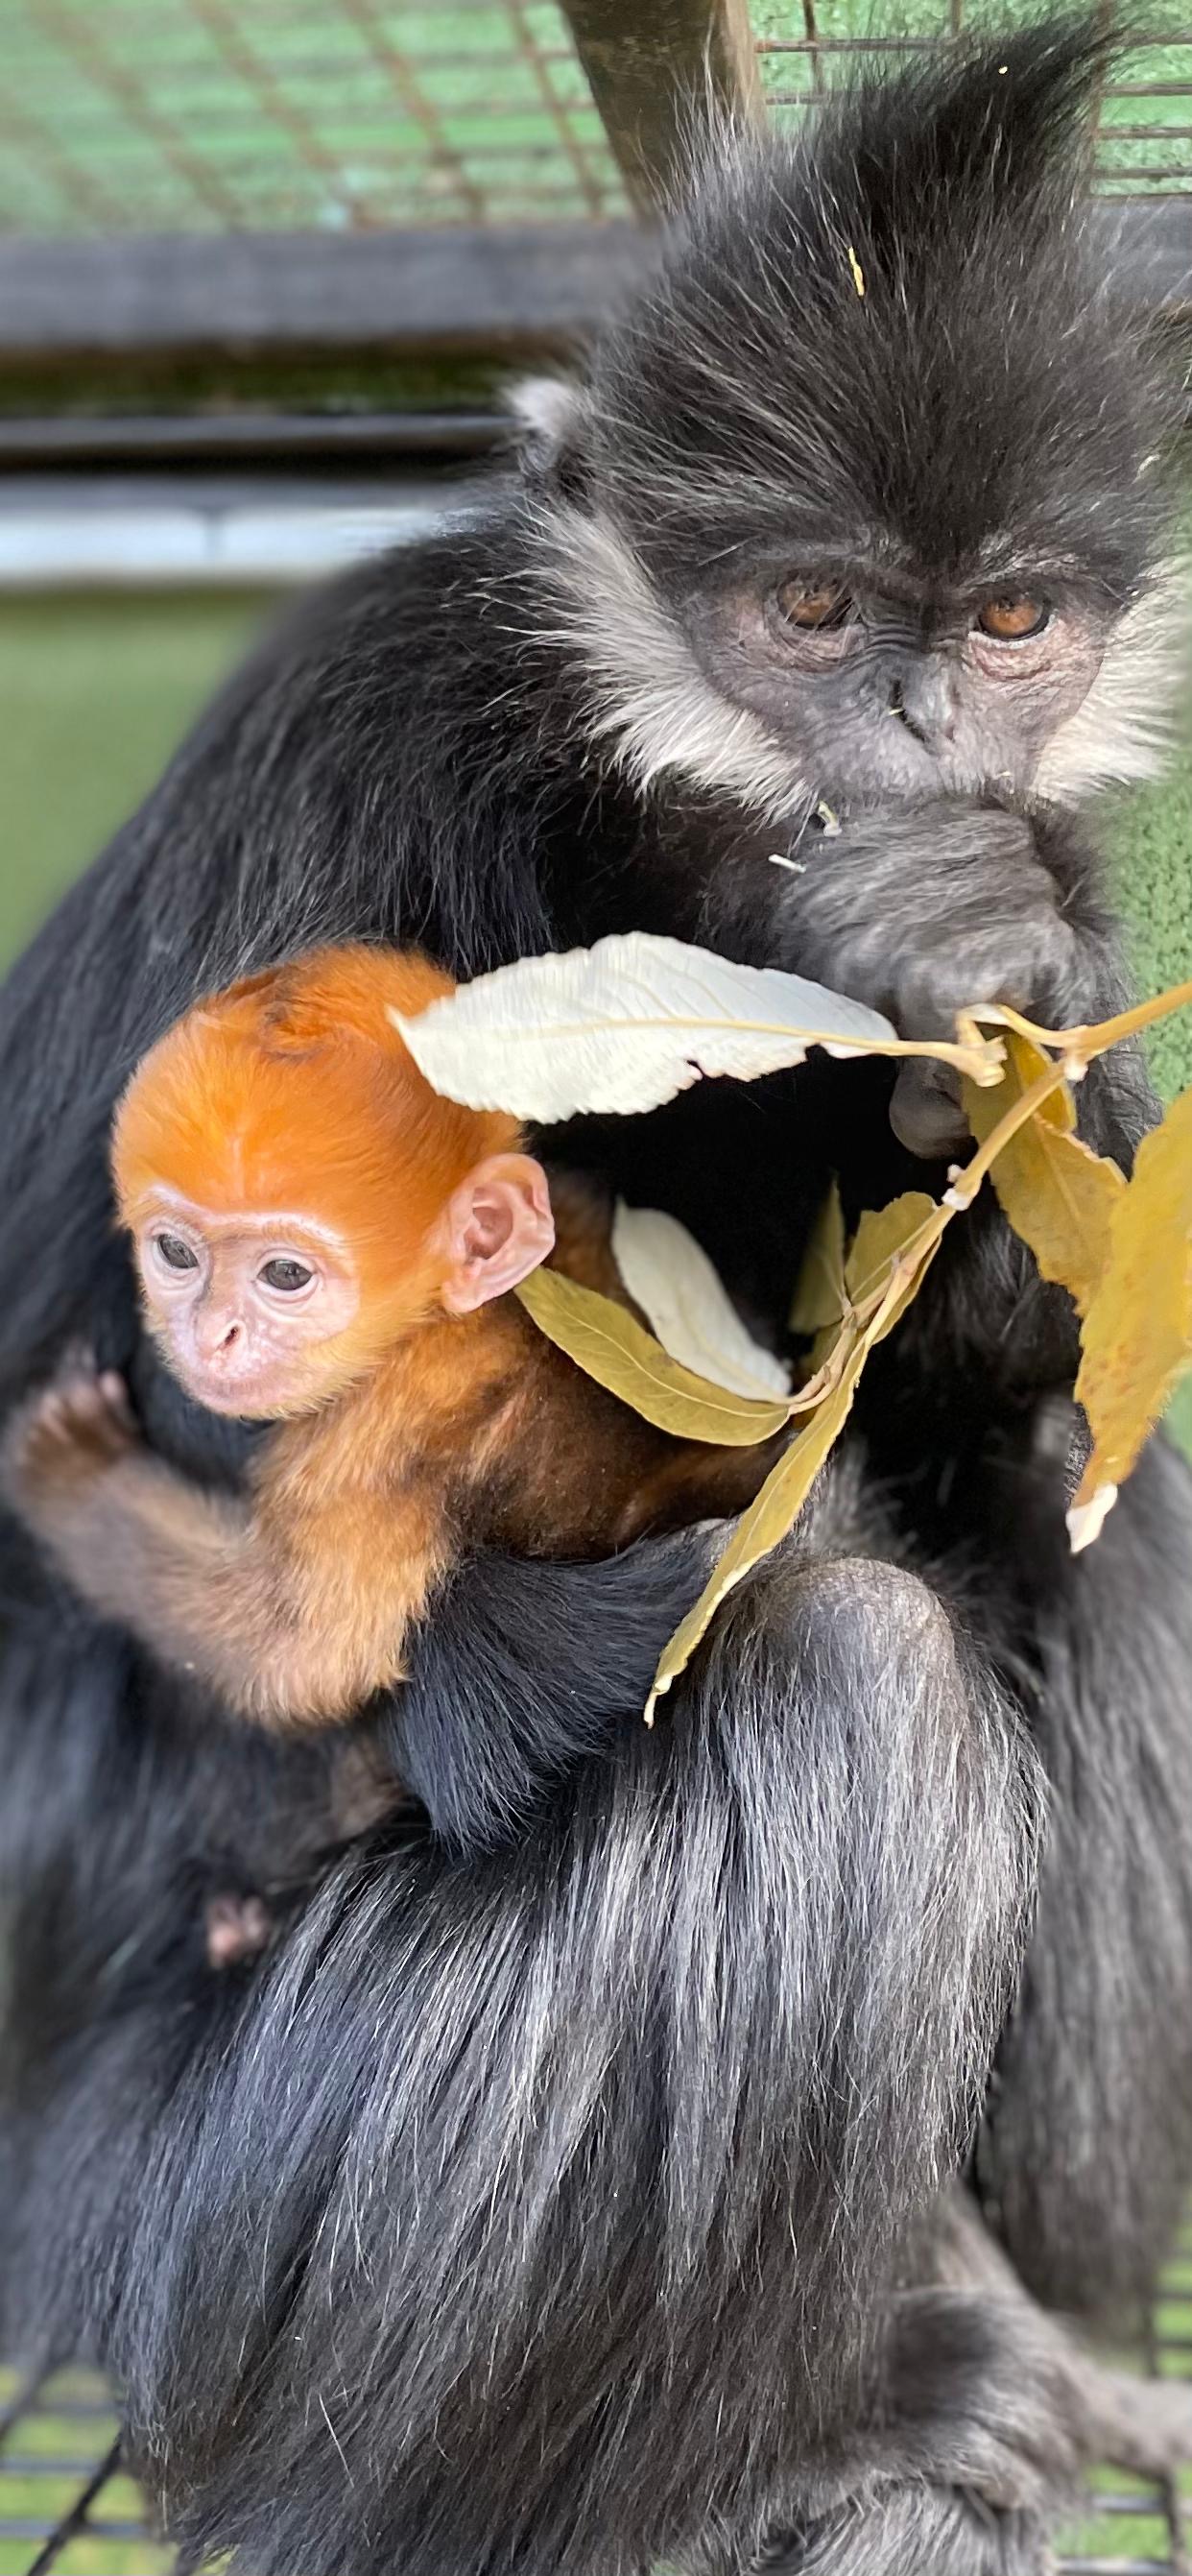 The baby monkey with bright orange hair being held by its mother 